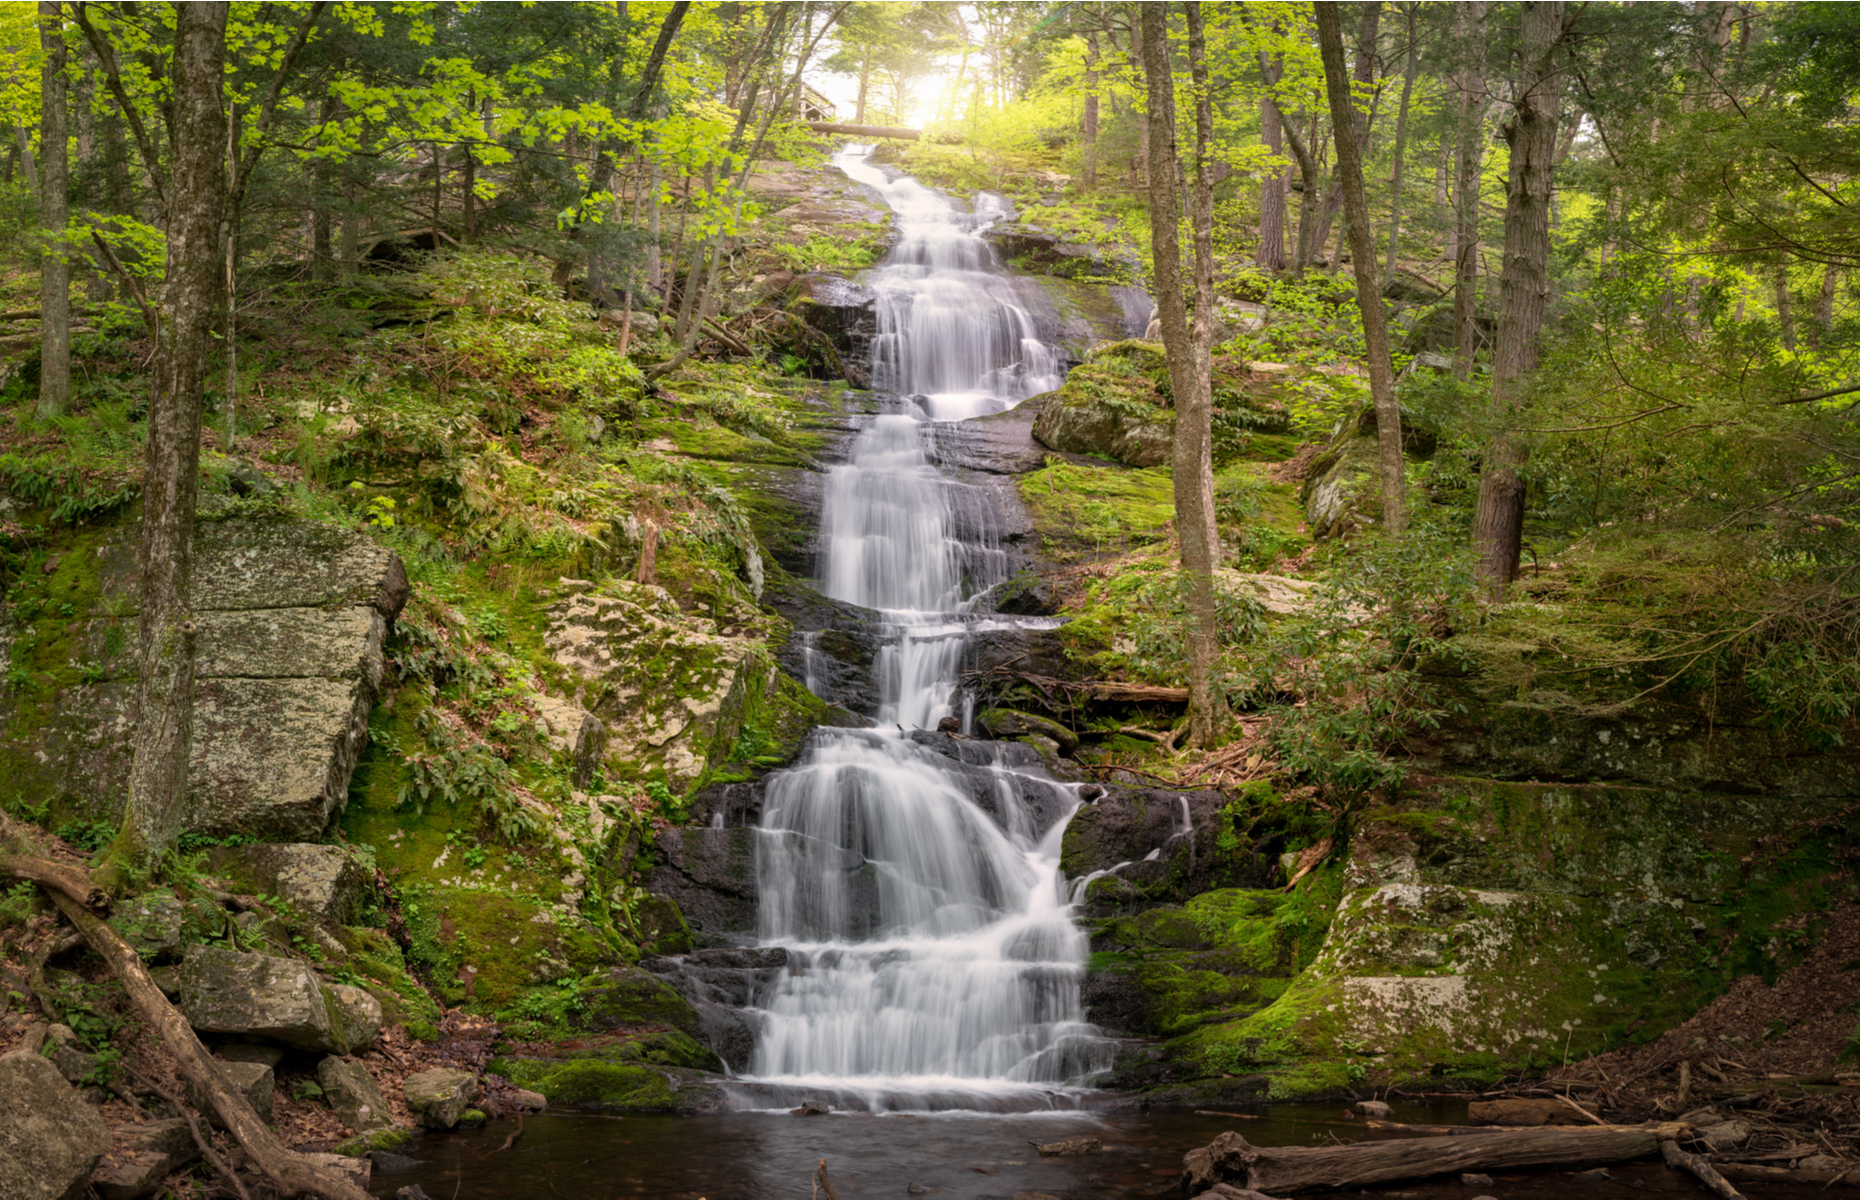 <p class="p1"><span>Crater Lake and Hemlock Pond are just a short hike away from <a href="https://www.njhiking.com/best-hikes-in-nj-buttermilk-falls/" rel="noreferrer noopener"><span>Buttermilk Falls</span></a>, the state’s highest waterfall. From there you can head over to nearby Tillman Ravine, a fairytale-like hemlock forest with cascading waters and a cemetery dating back to the 1800s. </span></p>